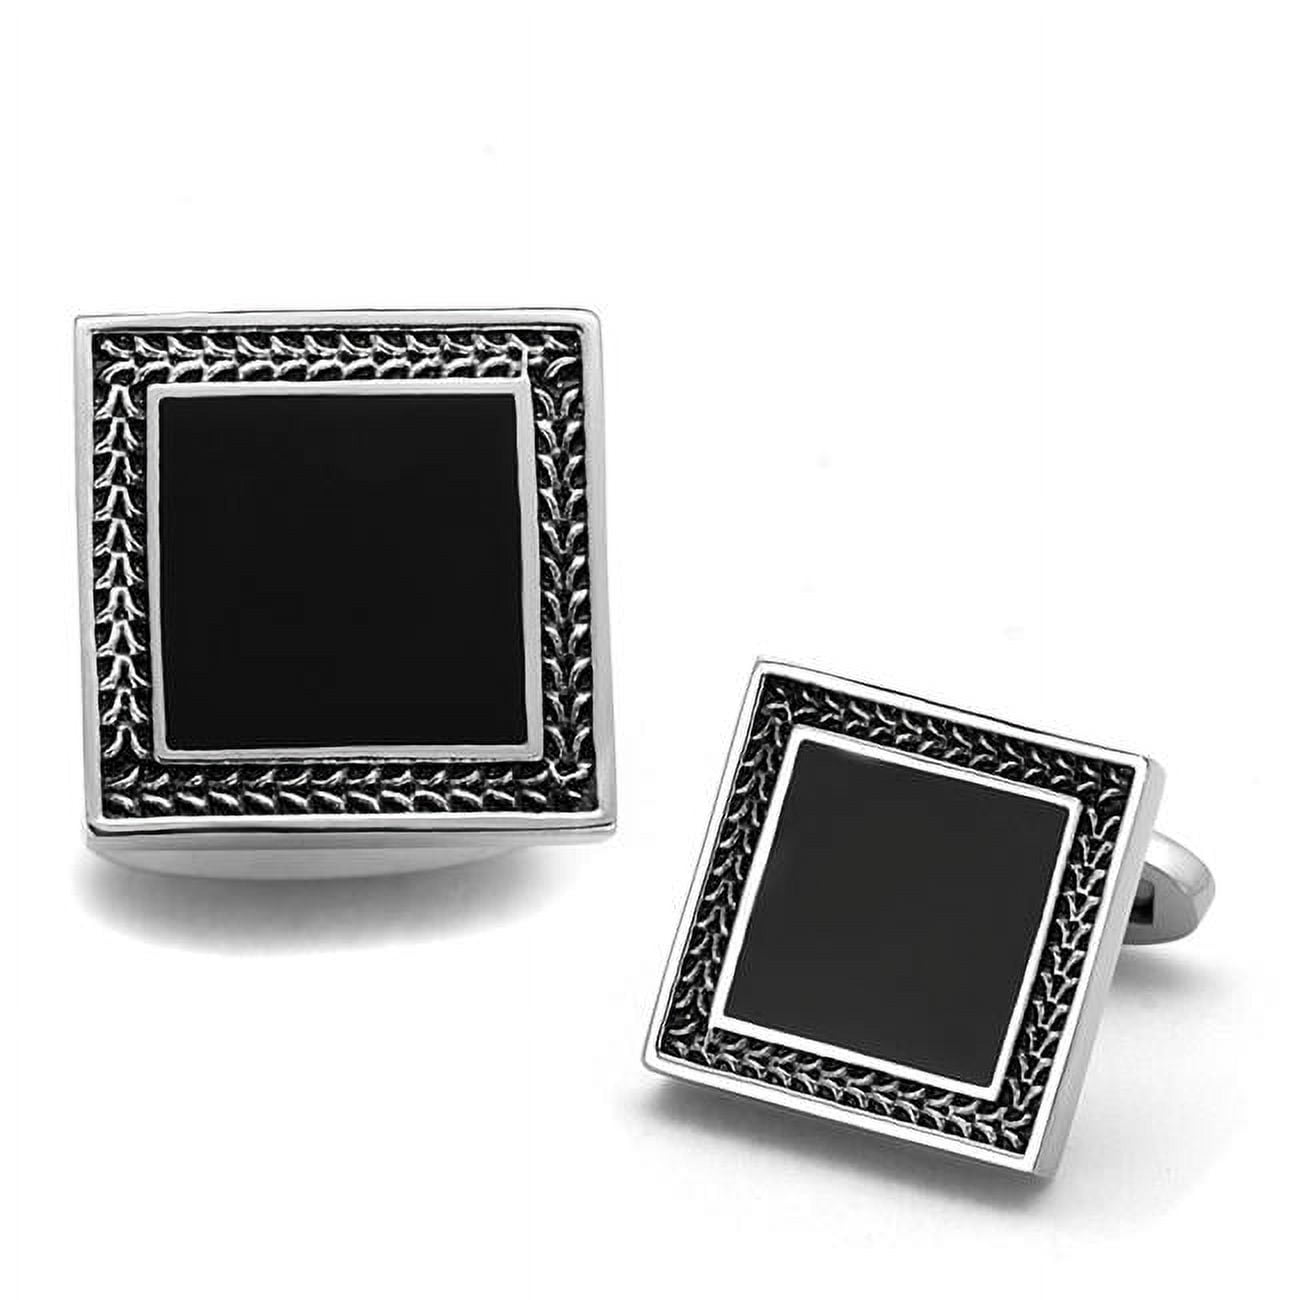 Picture of Alamode TK1651 Men High Polished Stainless Steel Cufflink with Epoxy in Jet